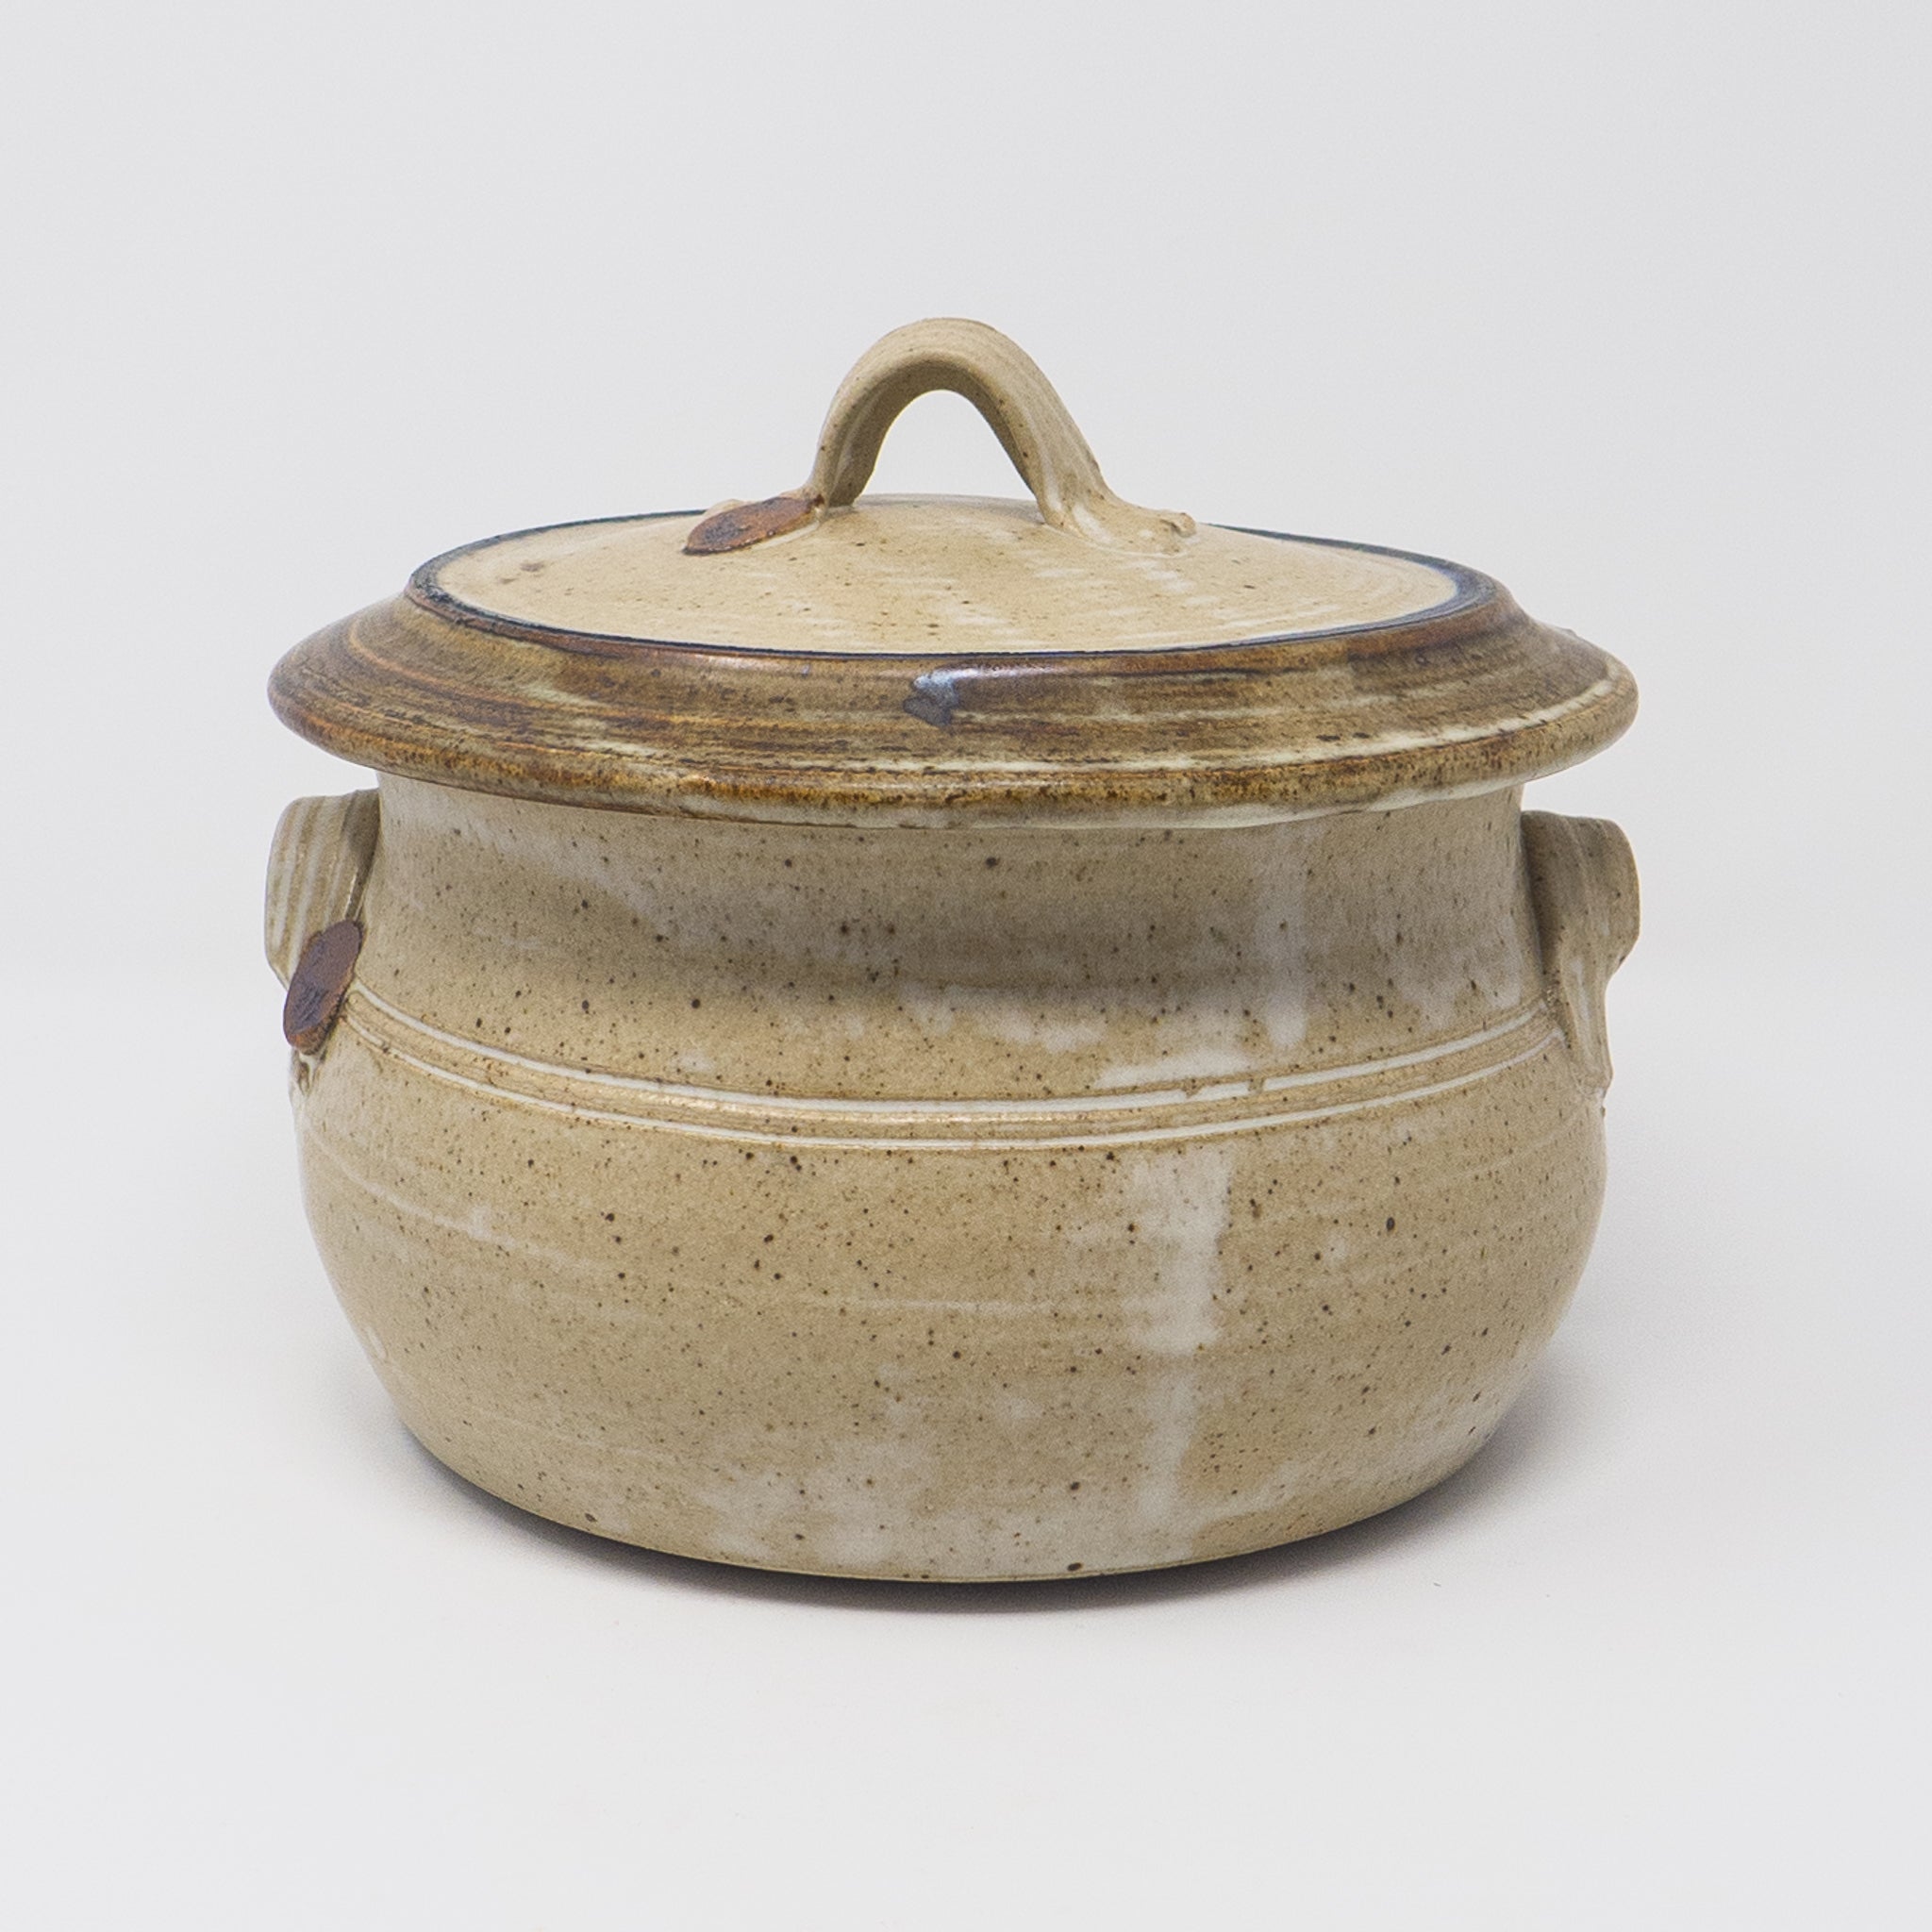 Lidded Pottery Casserole Dish With Twisted Strap Handle 